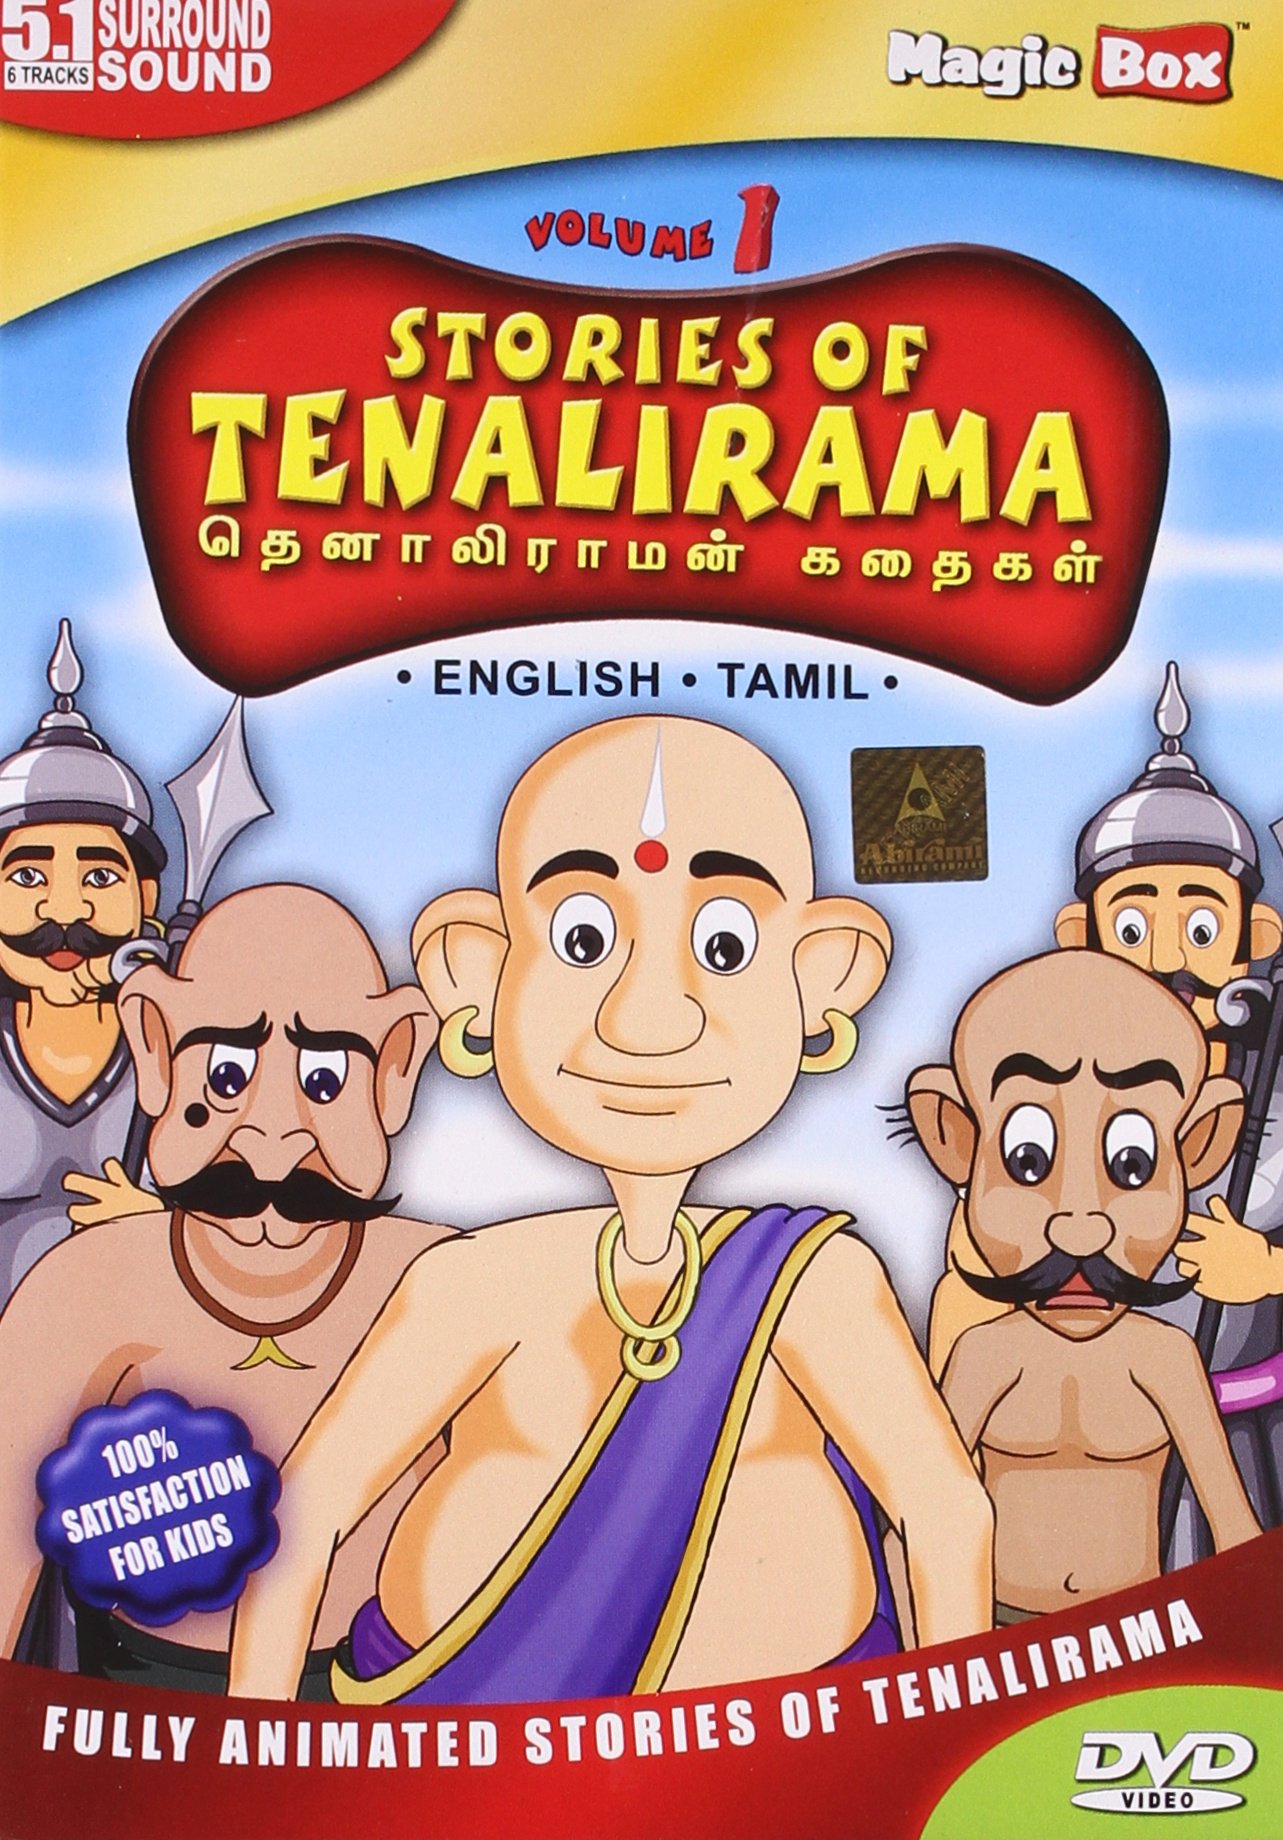 stories-of-tenalirama-vol-1-movie-purchase-or-watch-online